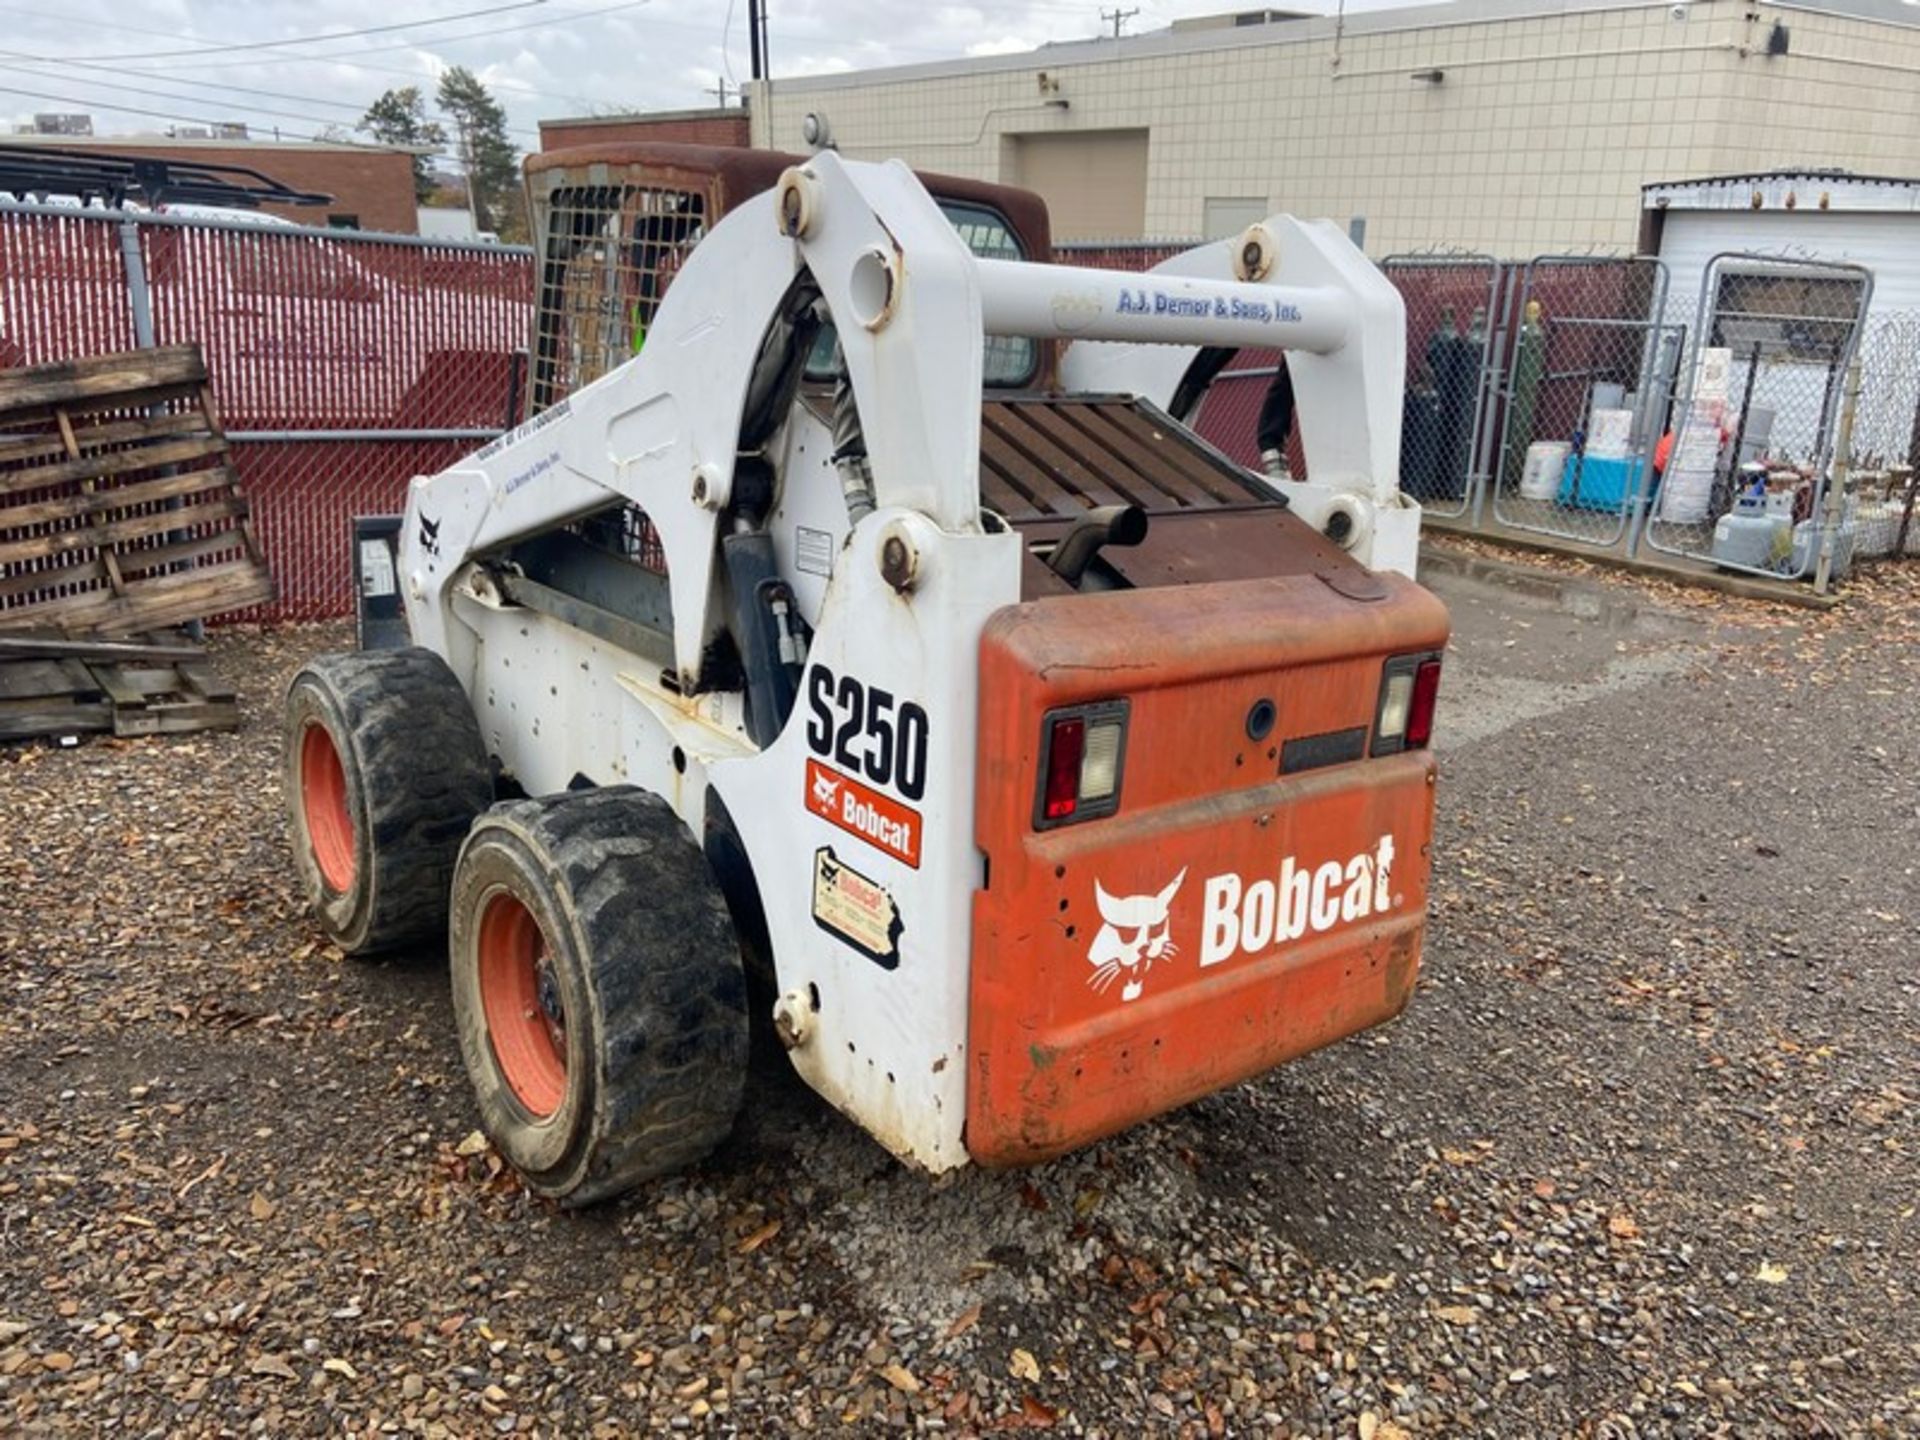 2010 Bobcat S250 Compact Skid Steer, VIN#: A5GM36985, with Fork Attachment (NOTE: DELAYED REMOVAL - Image 9 of 12